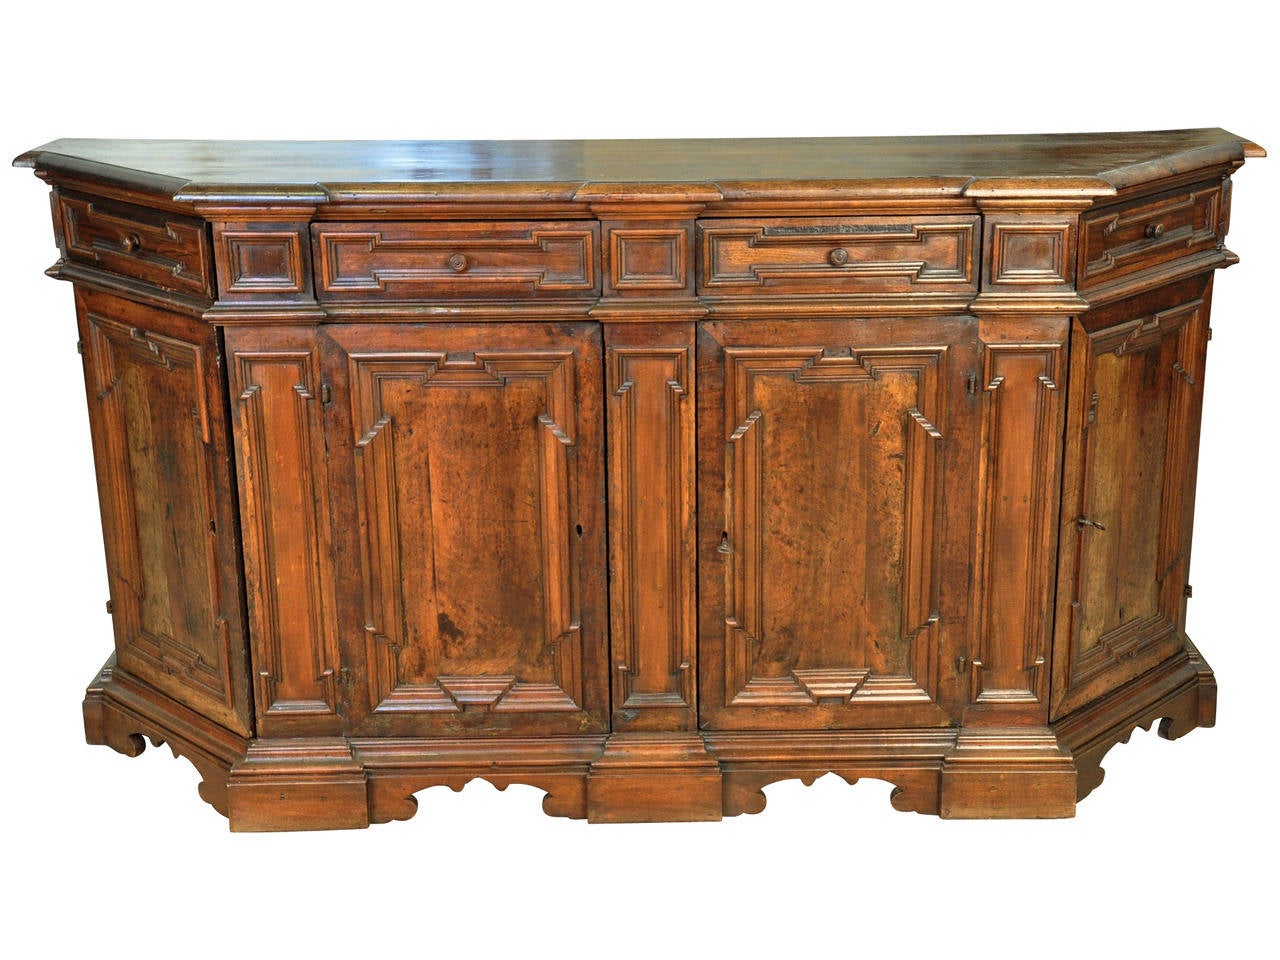 A very handsome 19th century solid walnut Credenza from the north of Italy.  Beautifully finished with molded door and drawer panels - raised on sculpted bracket feet.